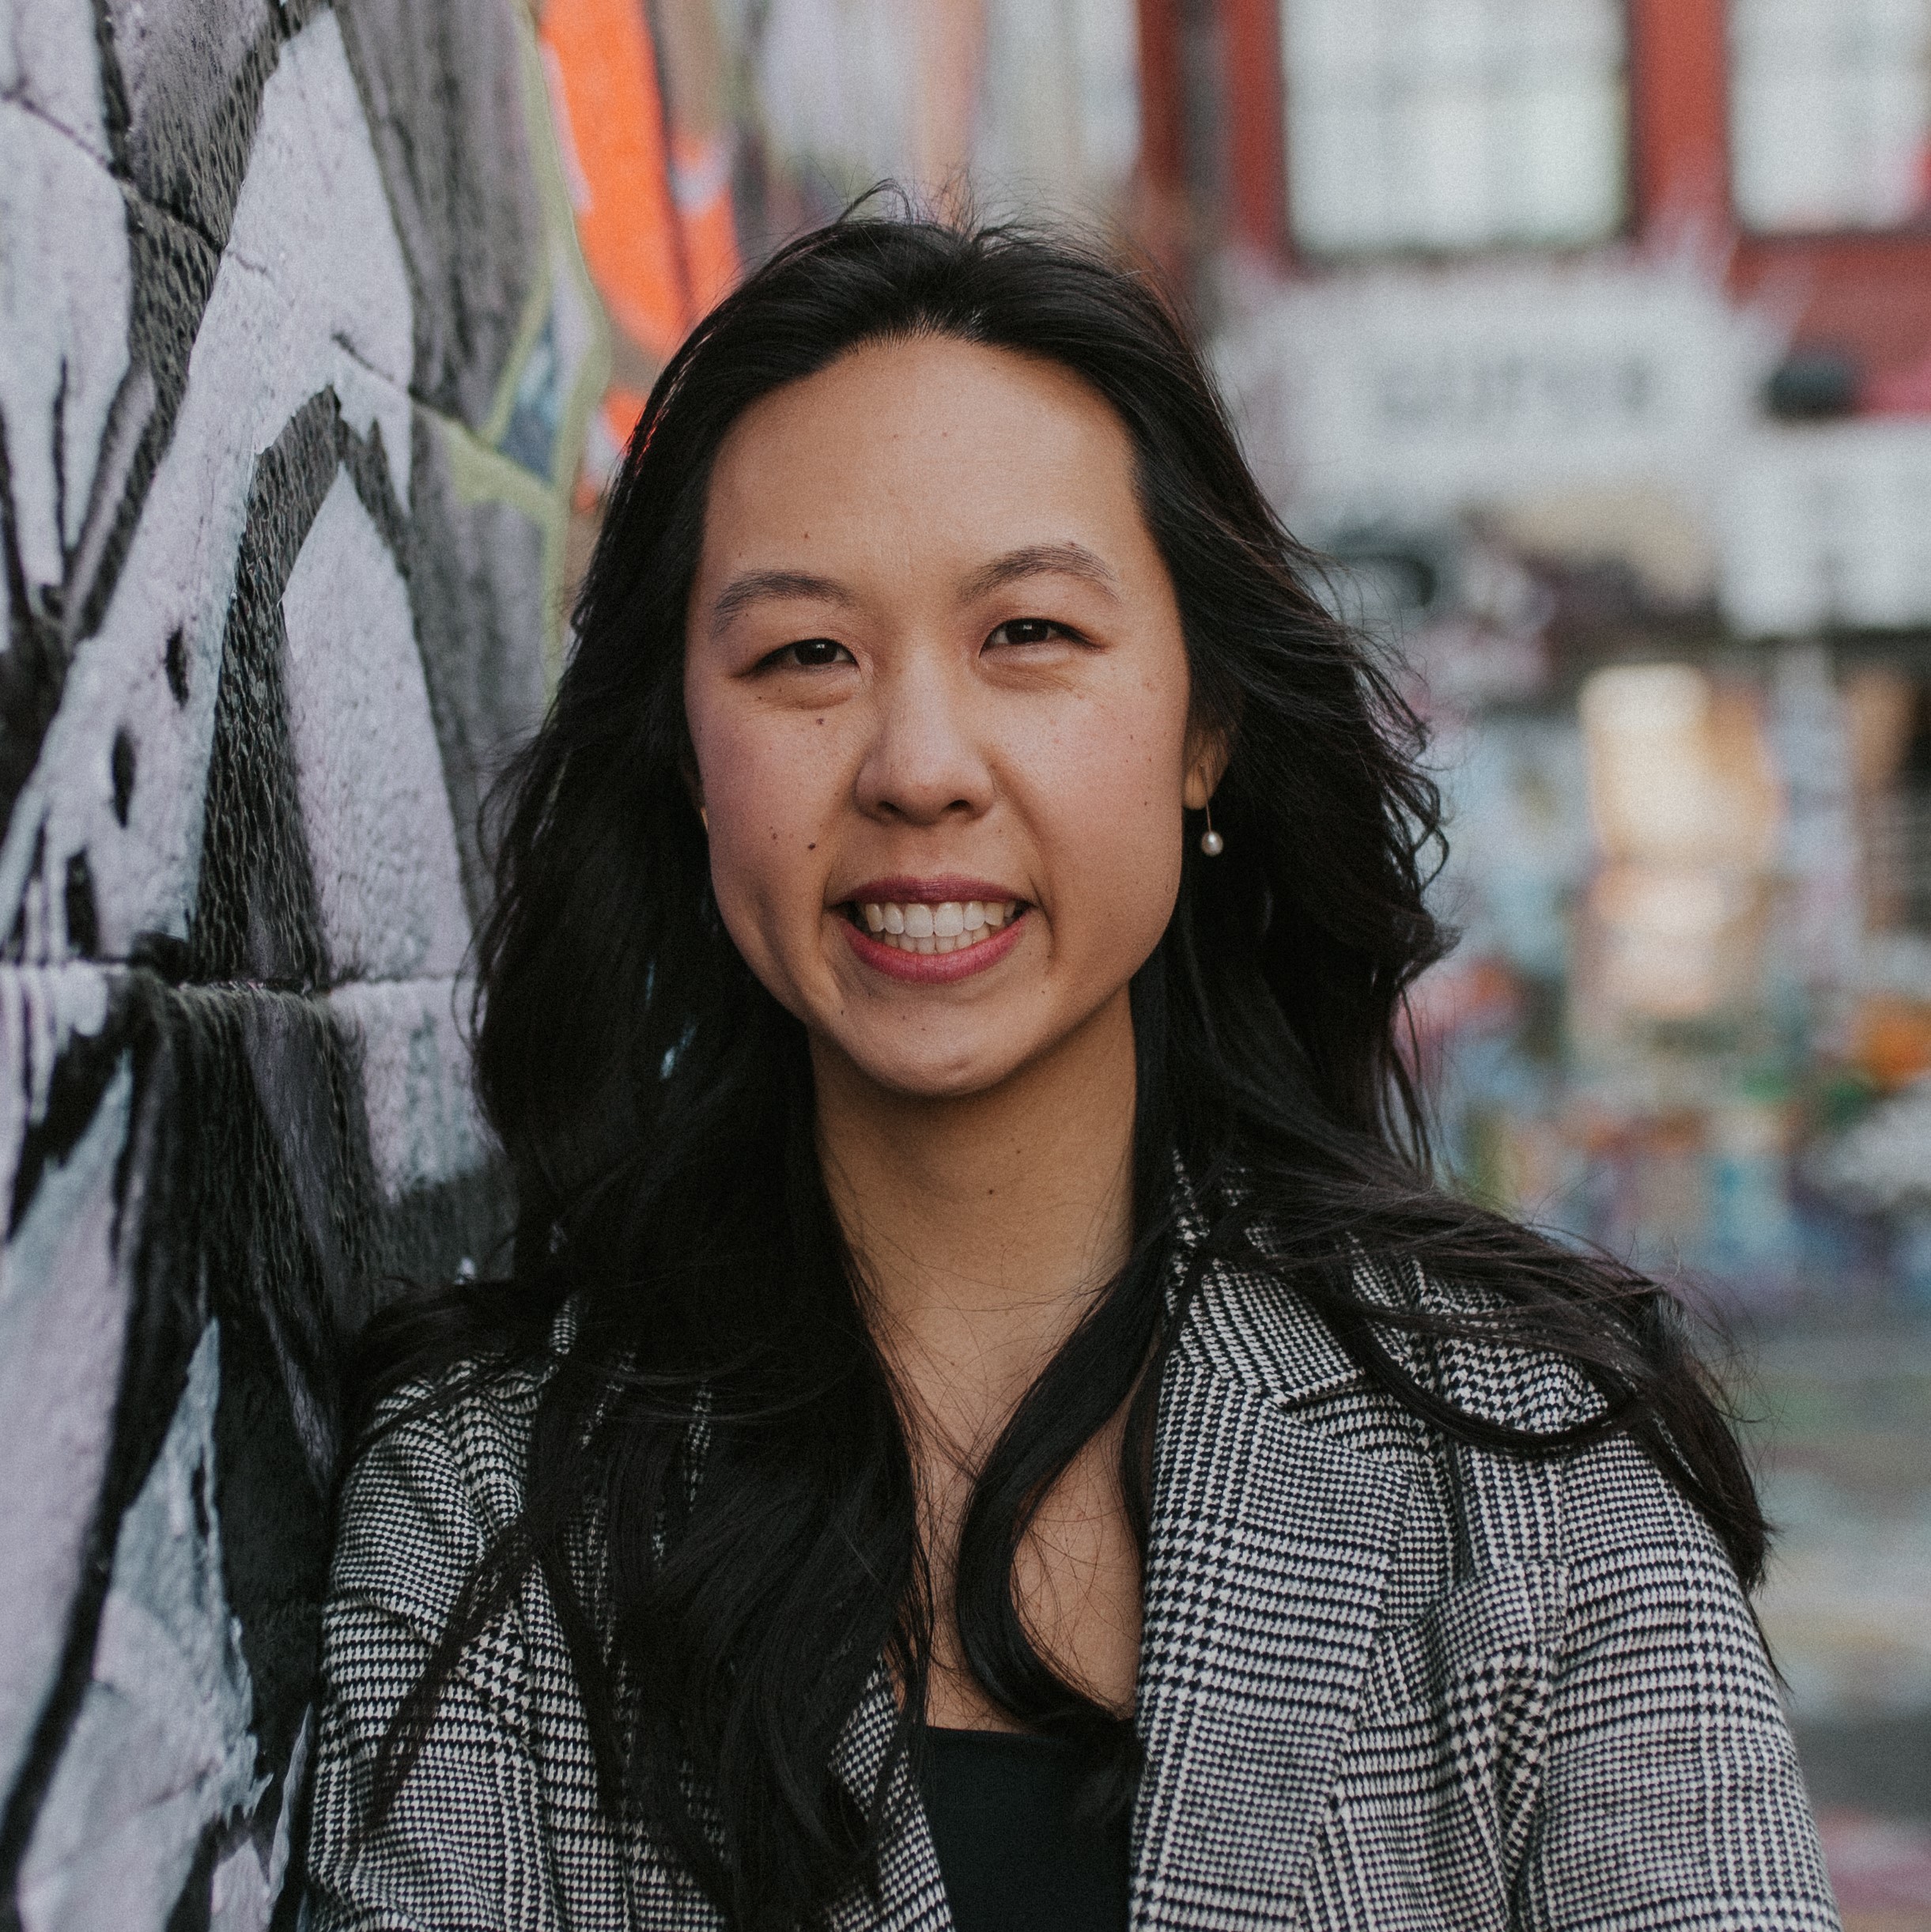 Cochlear Center faculty member Alison Huang headshot. Huang is wearing a black and white ensemble and is leaning on a graffiti-covered wall 